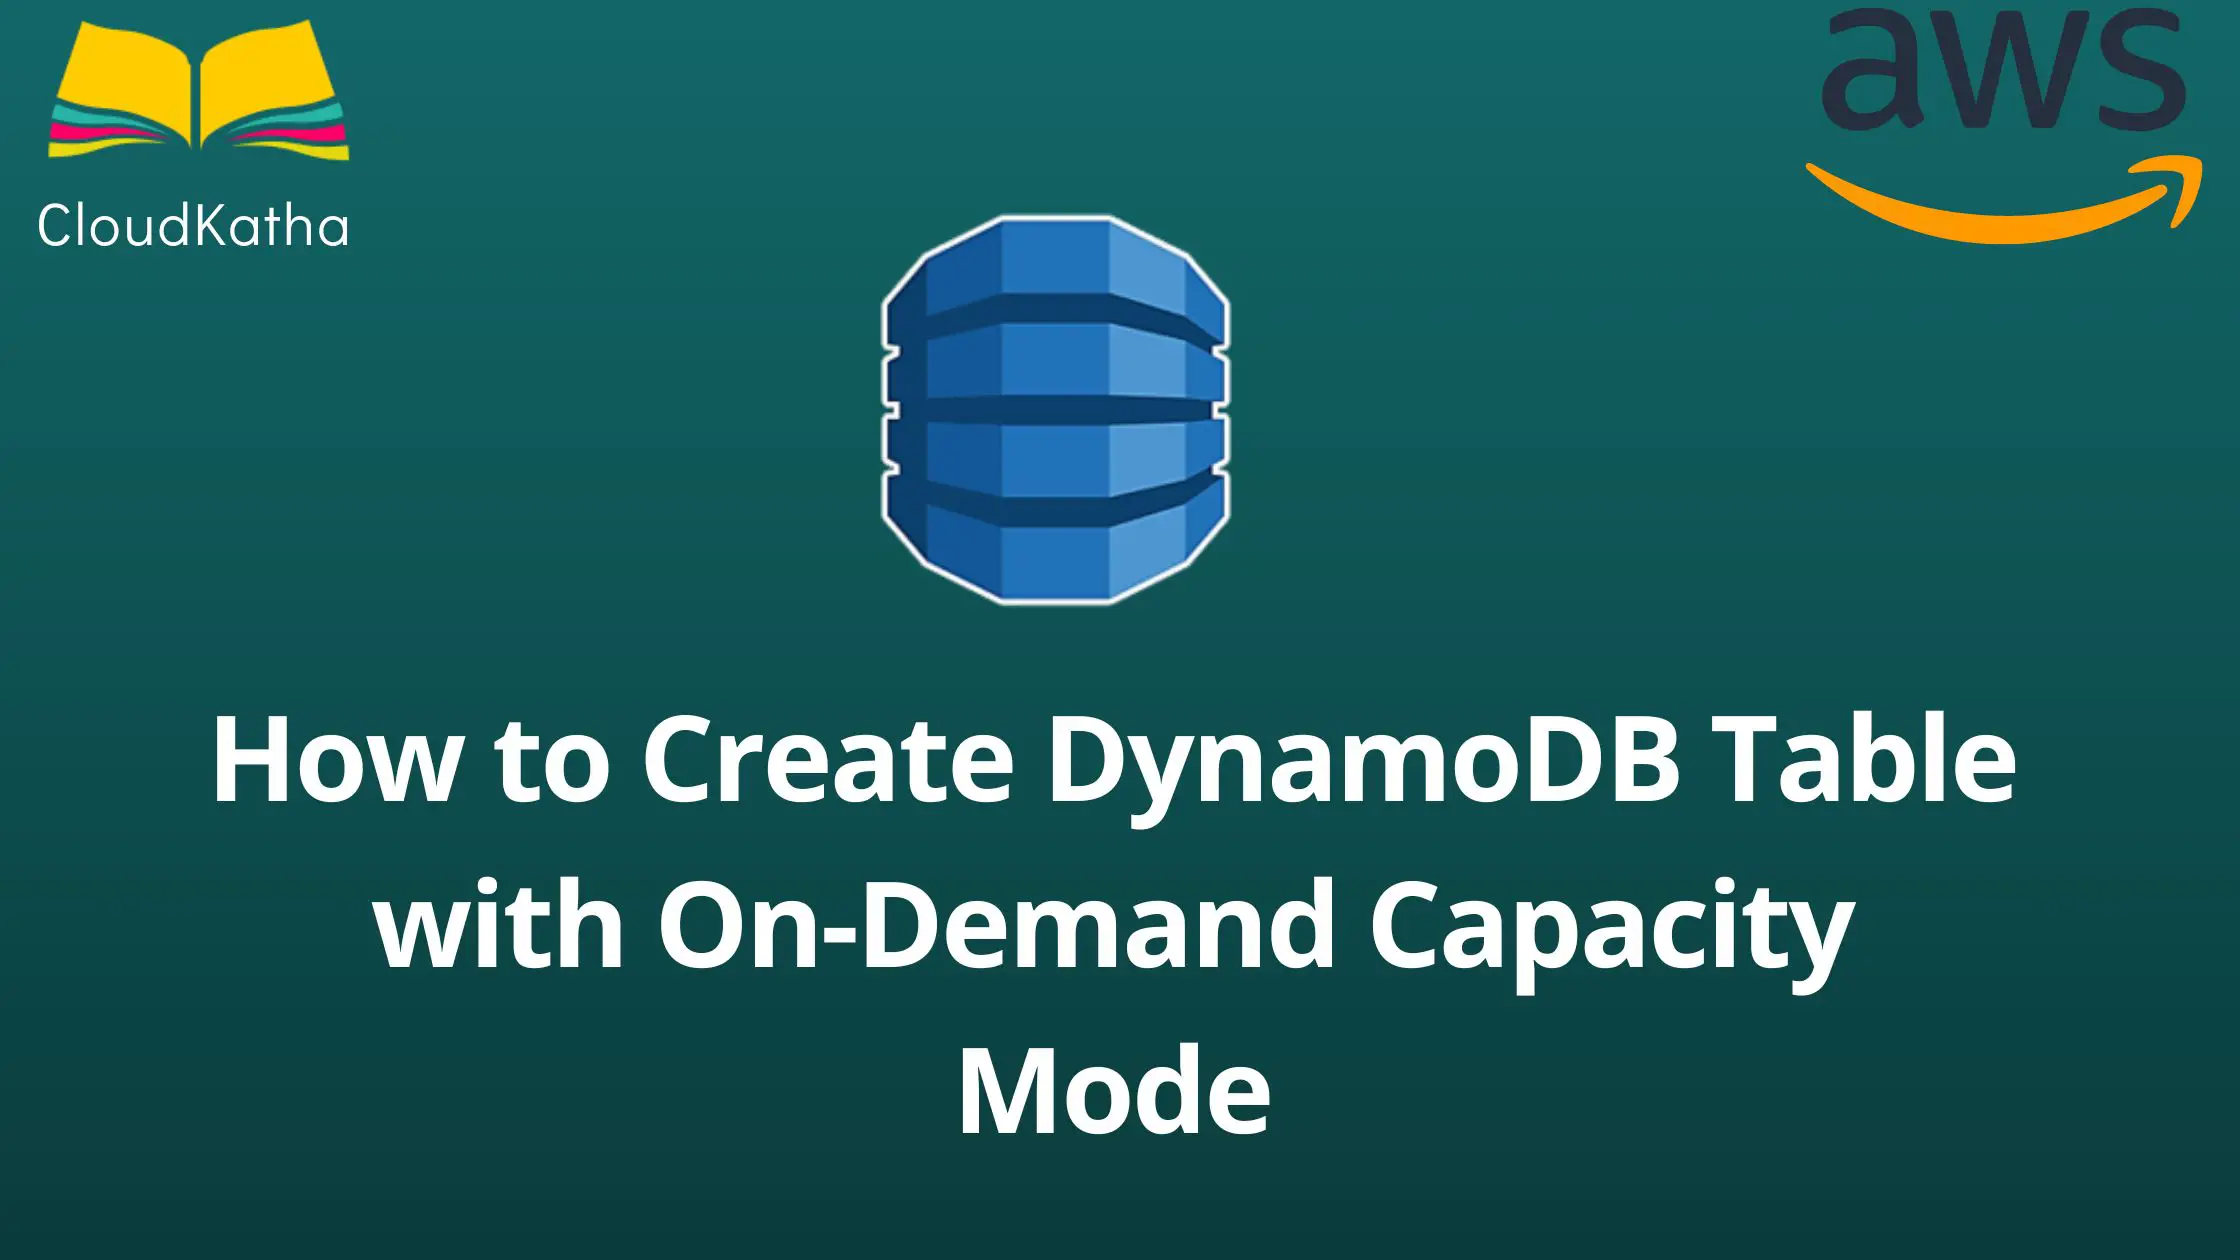 How to create DynamoDB table with on-demand Capacity mode